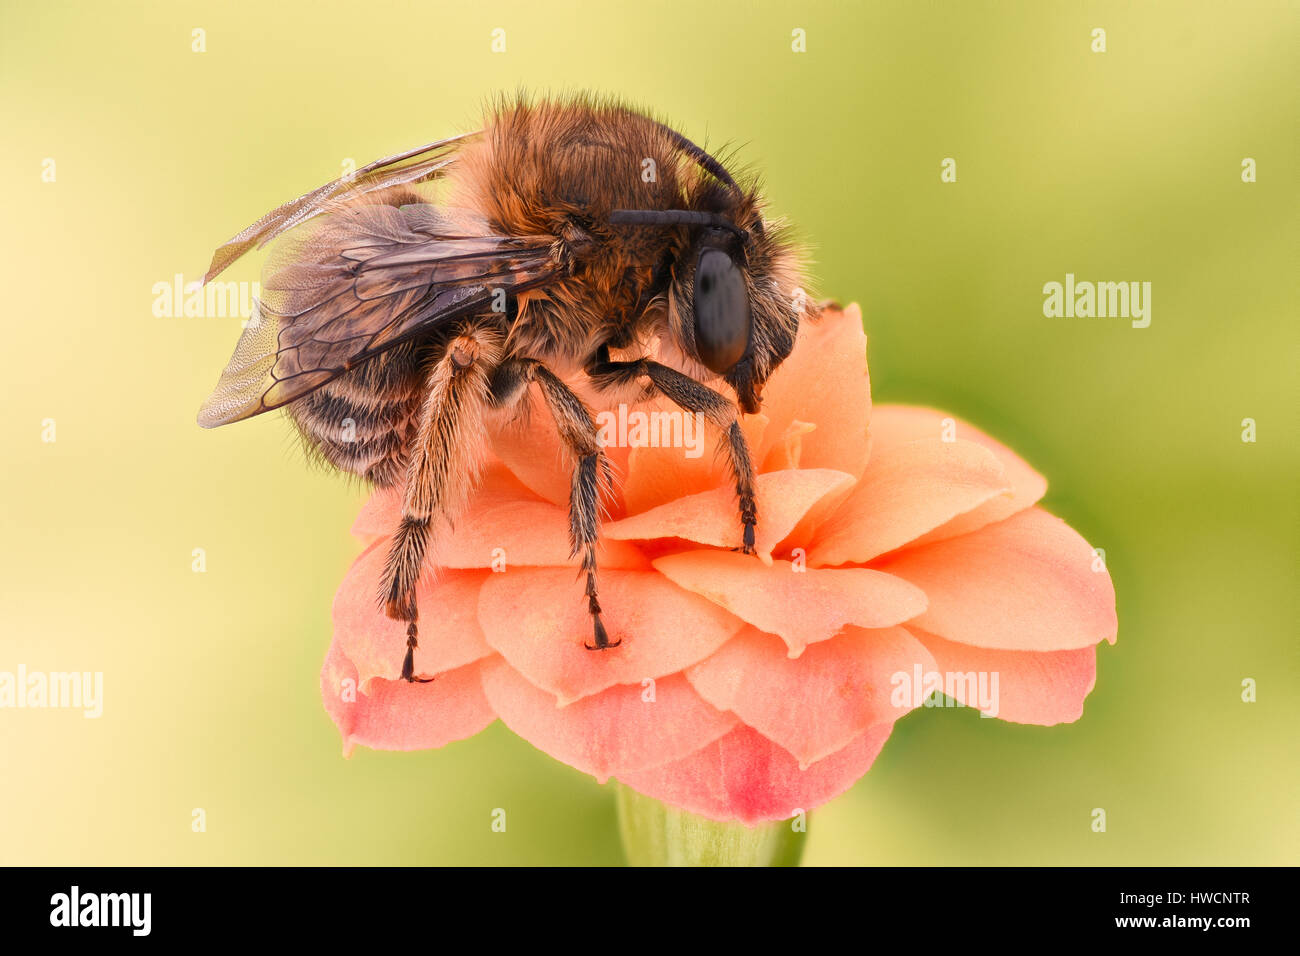 Extreme magnification - Bee pollinating flower Stock Photo